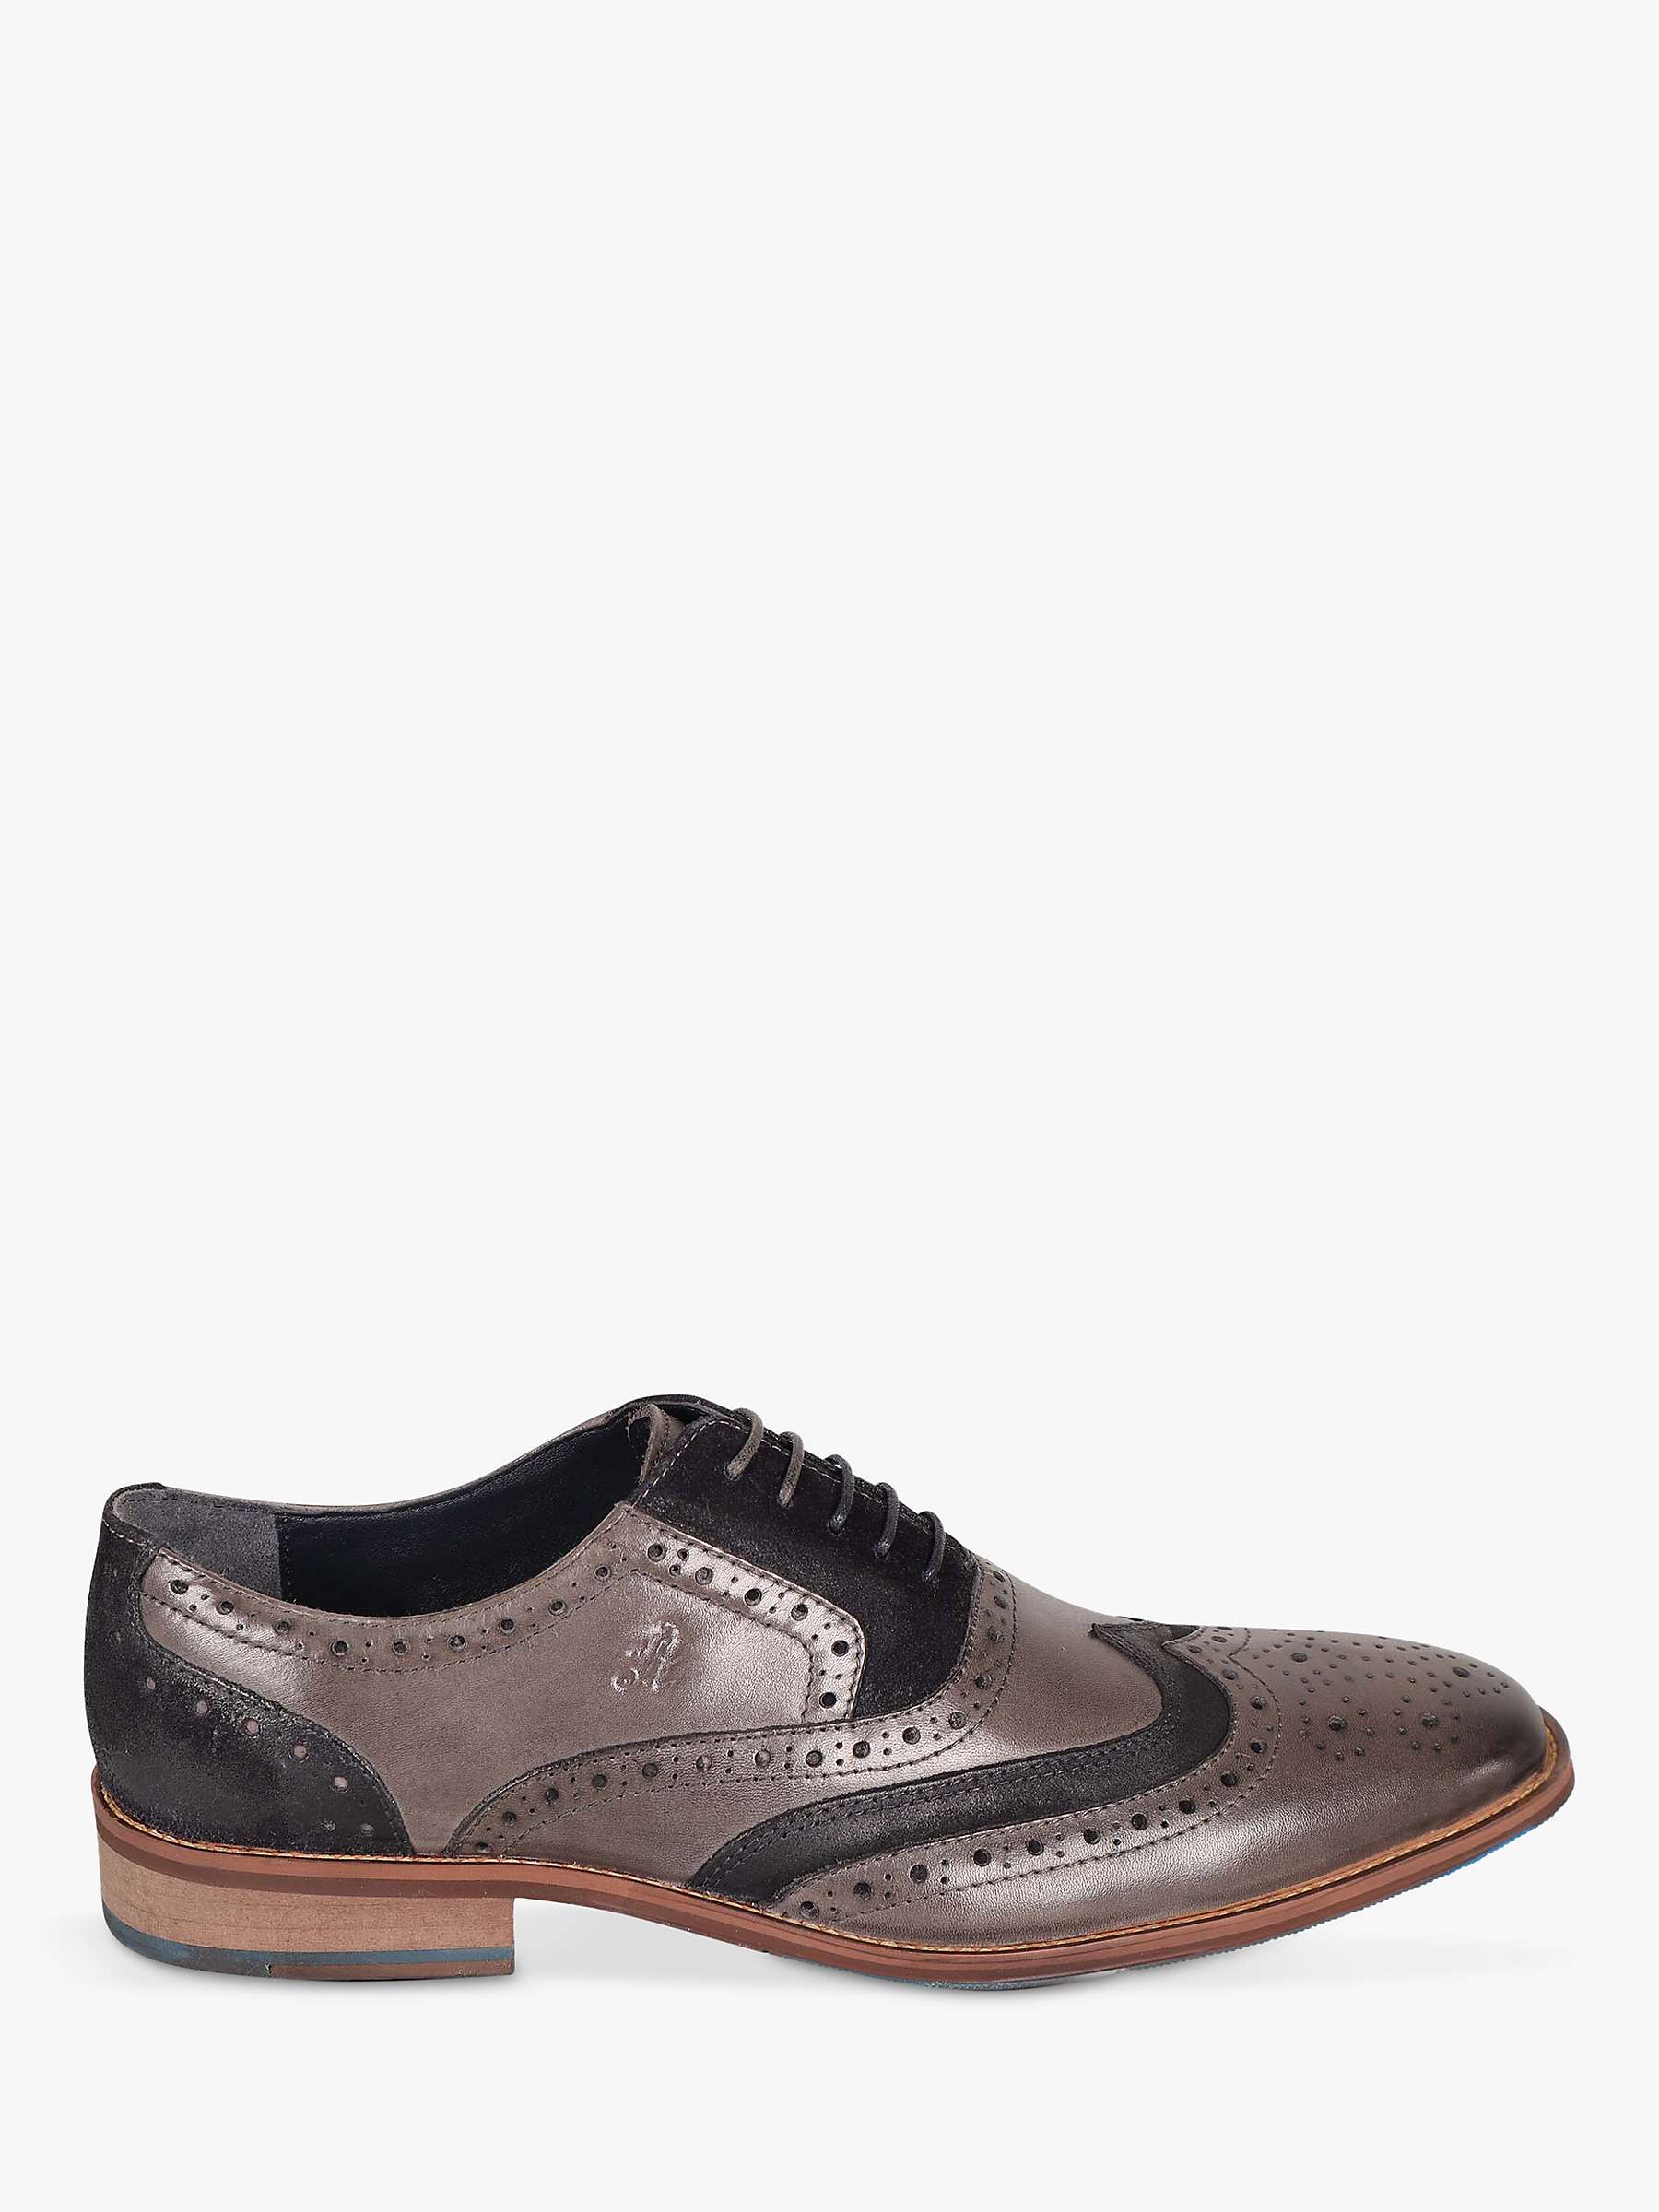 Buy Silver Street London Amen Collection Galway Leather Brogues, Grey/Black Online at johnlewis.com